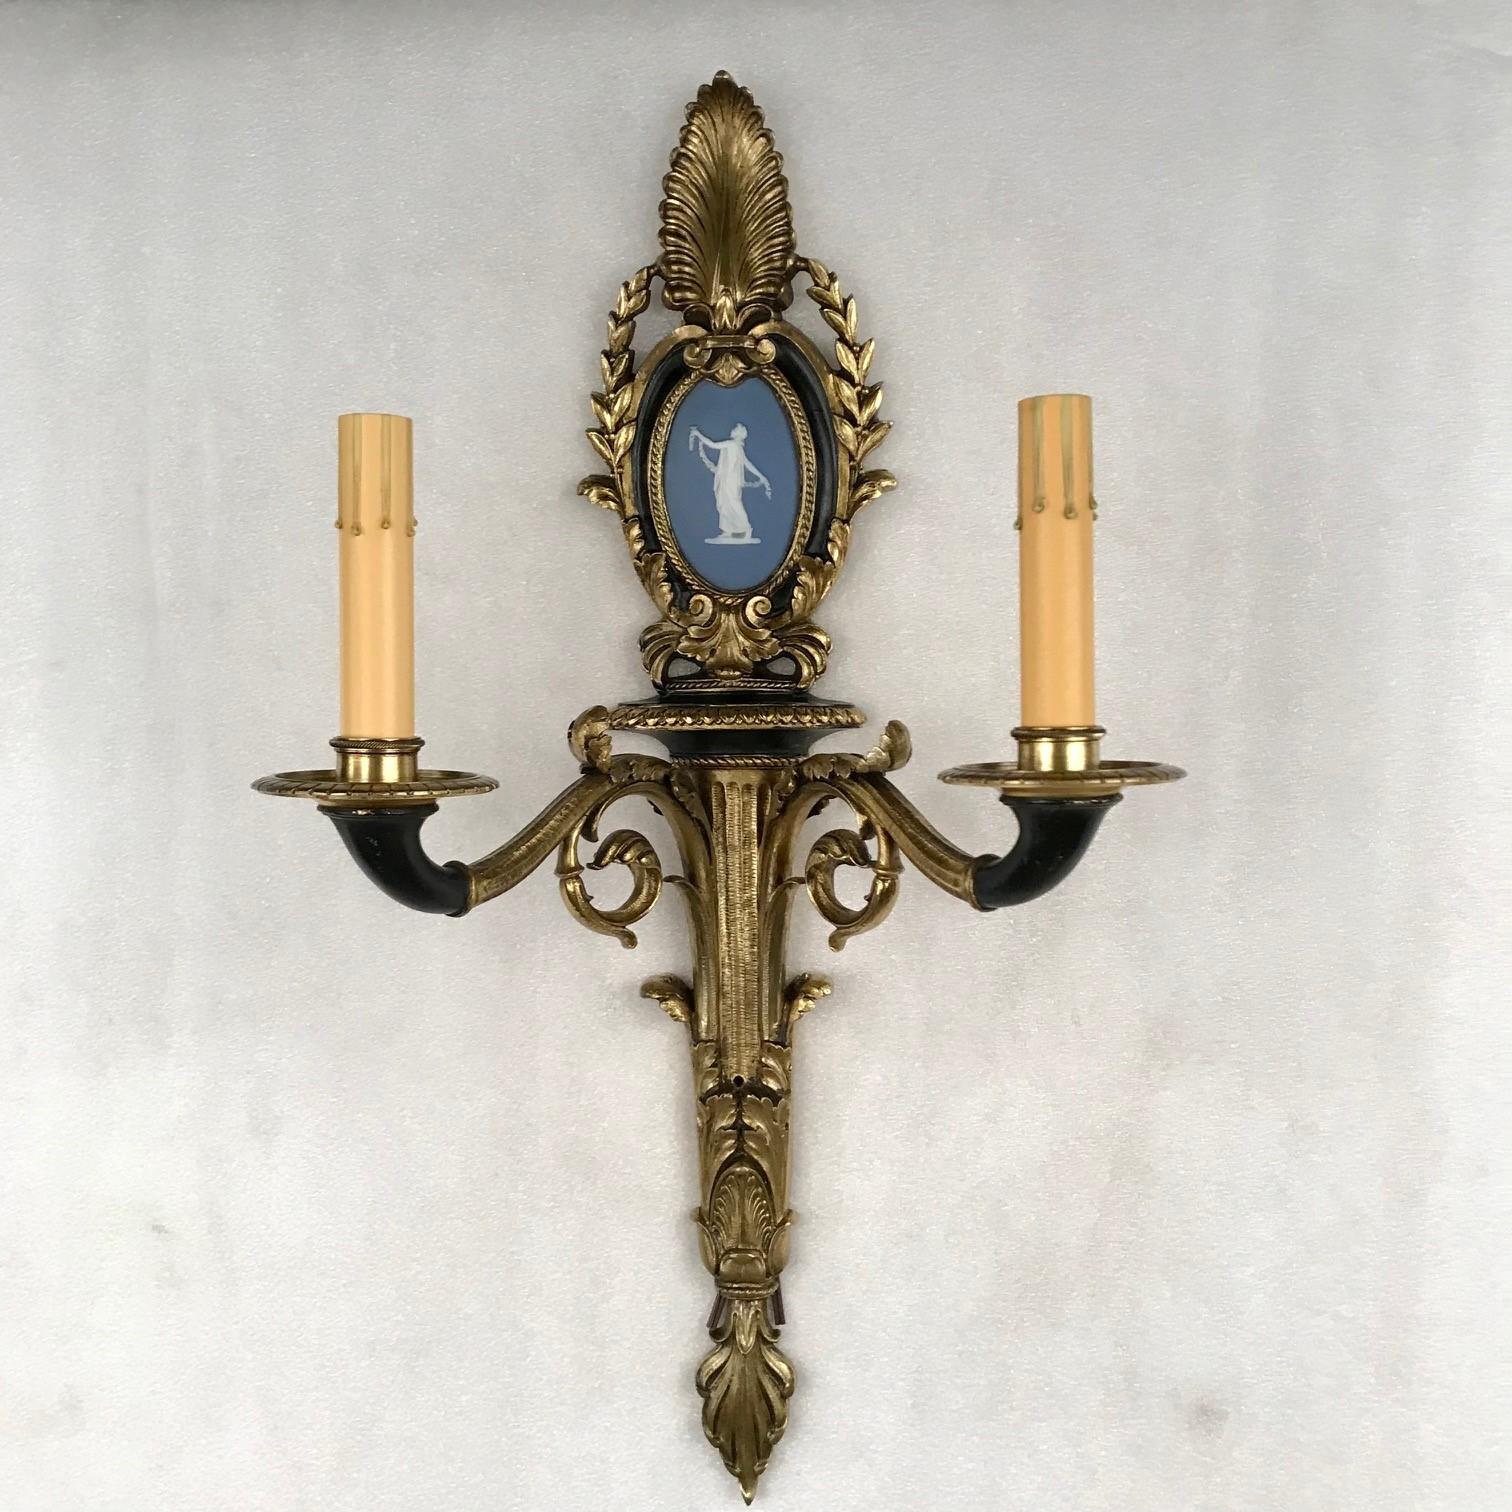 This elegant pair is in the style of the First Empire. Each is cast with palmettes, acanthus, garlands and an oval frame containing a blue bisque figure of a dancing maiden. The frame and sconces are partially ebonised giving a very Empirish feel.